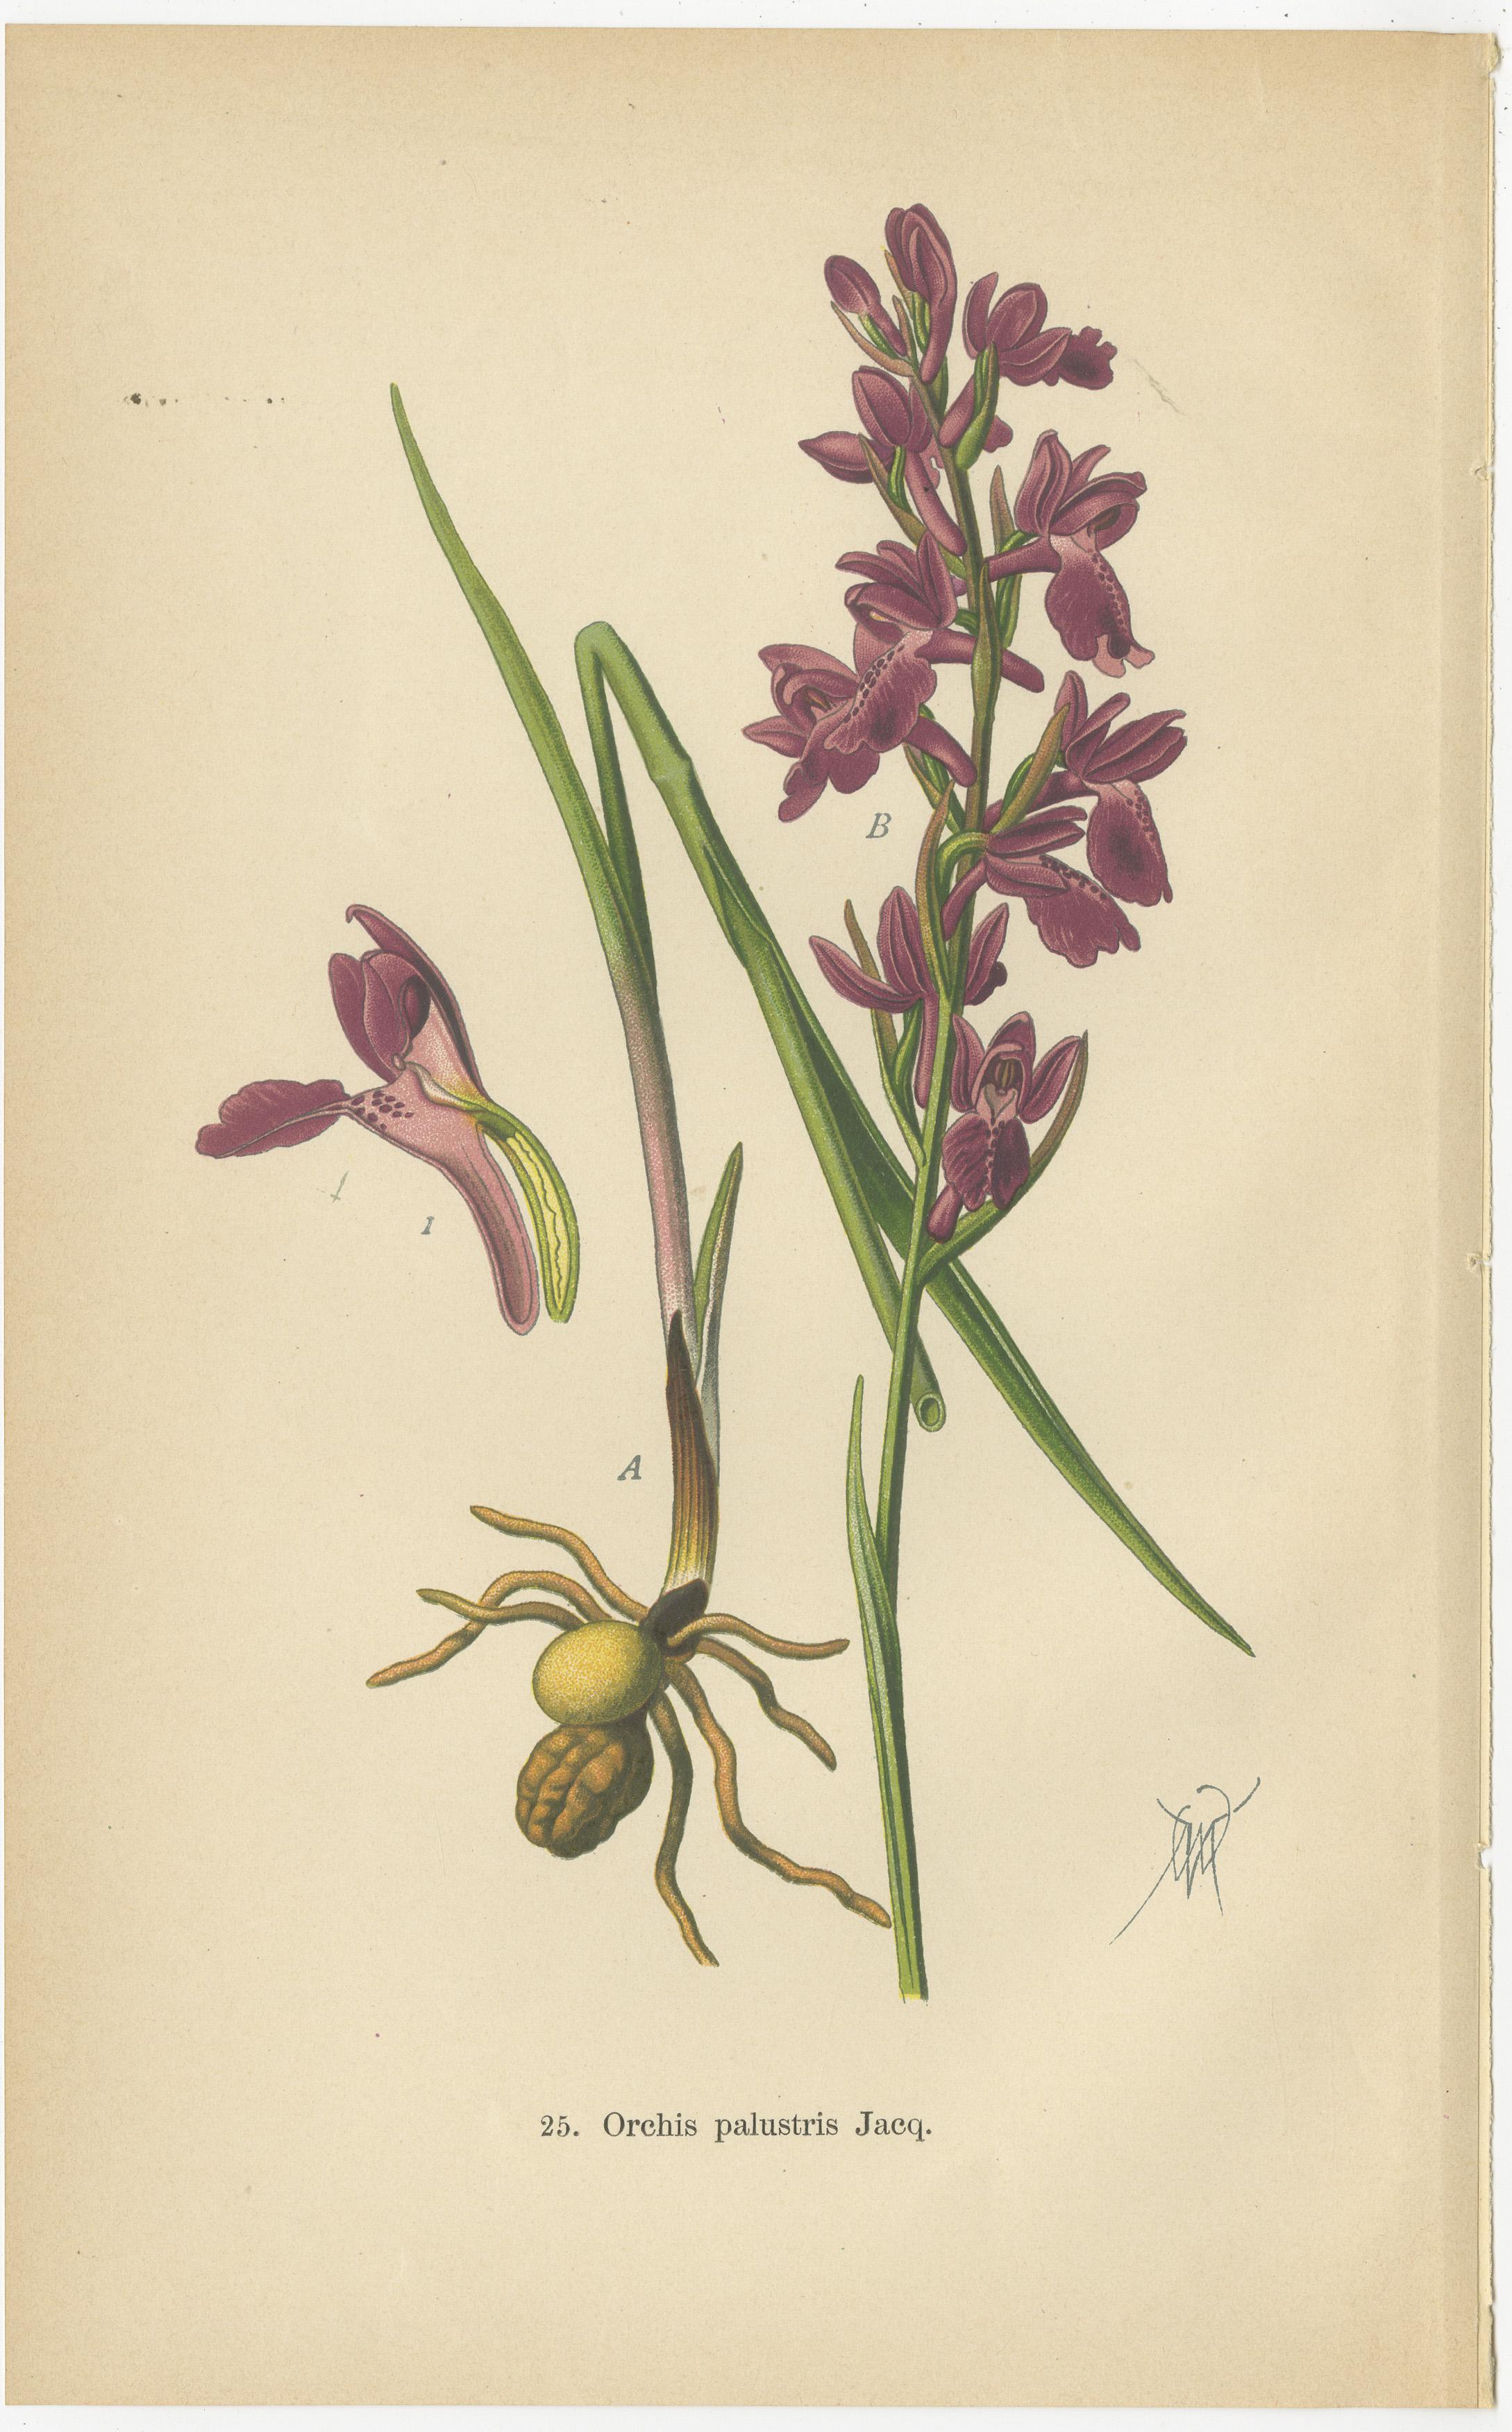 This collage presents a selection of orchid illustrations that exude the charm and detail characteristic of early 20th-century botanical art. Each image is a study of the orchid species native to Germany and the surrounding regions, as depicted by